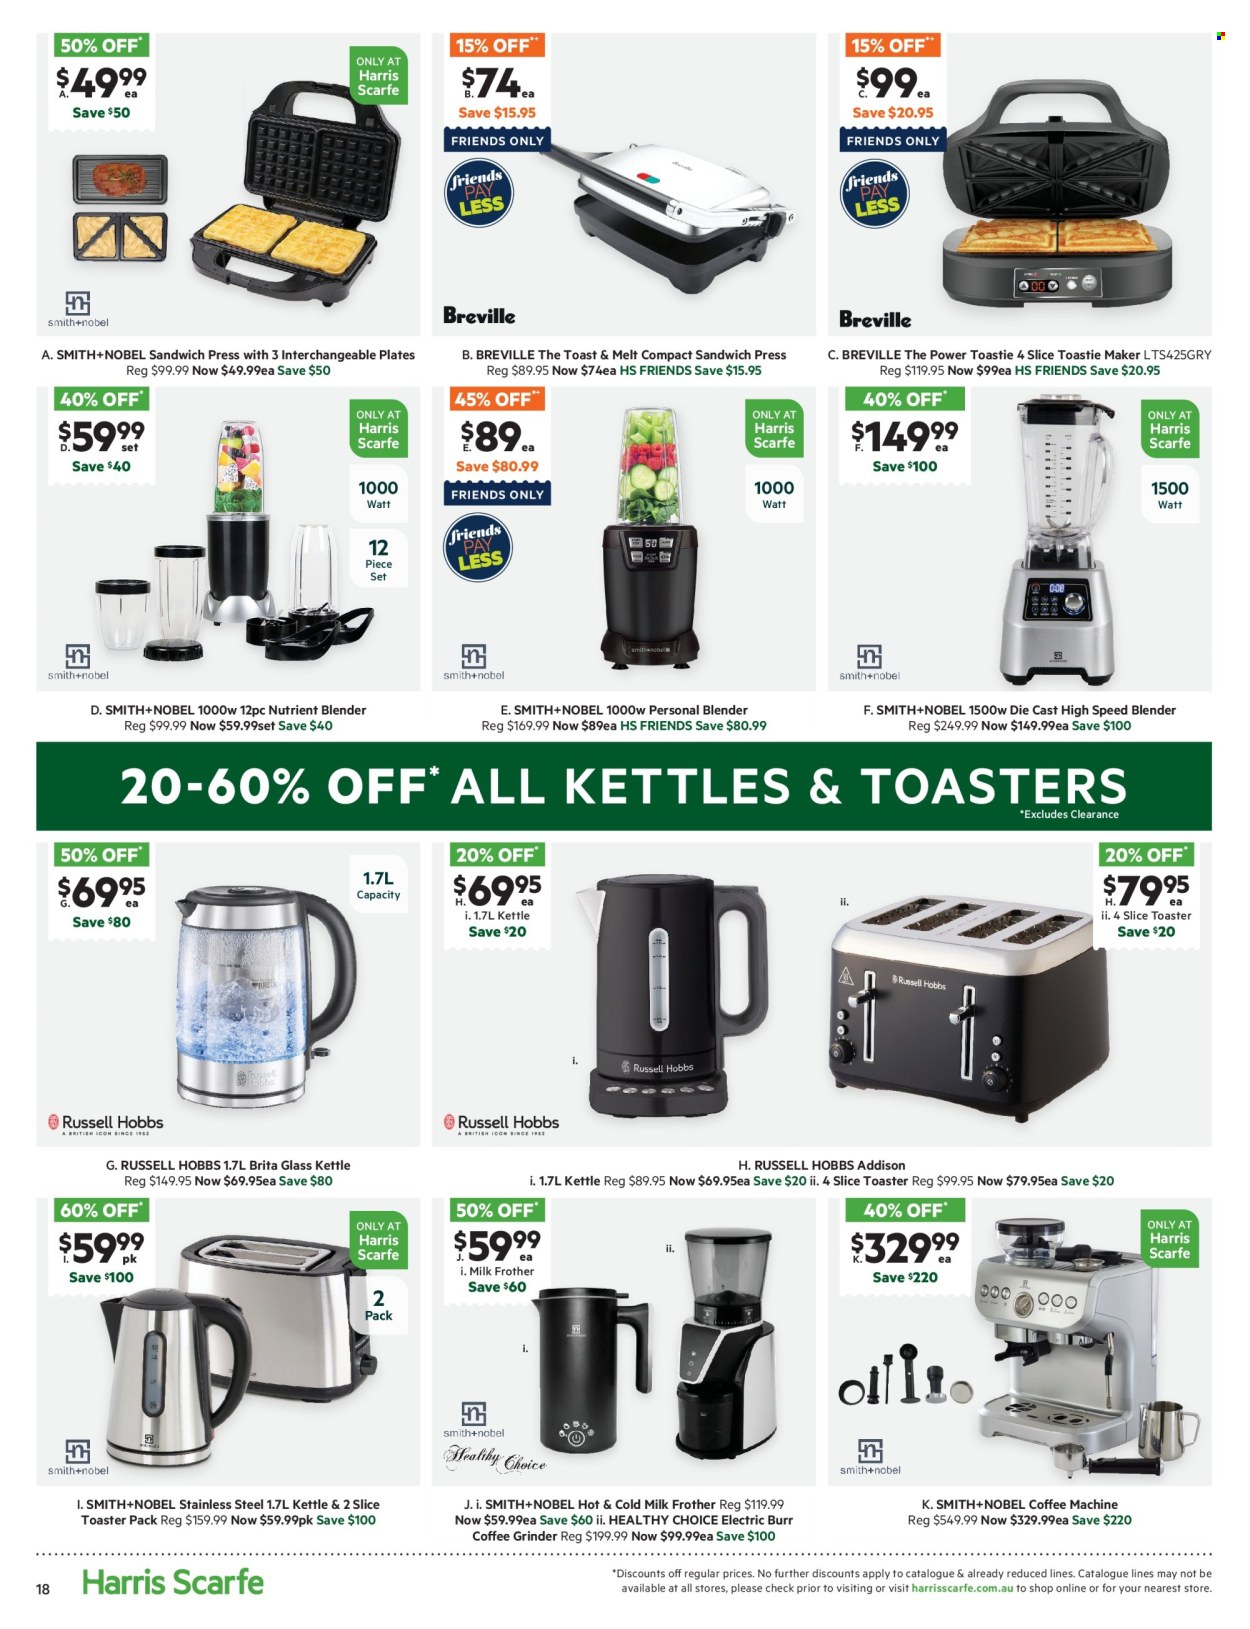 thumbnail - Harris Scarfe Catalogue - Sales products - coffee grinder, Smith+Nobel, coffee machine, blender, Russell Hobbs, toaster, sandwich press, kettle, grinder, milk frother. Page 18.